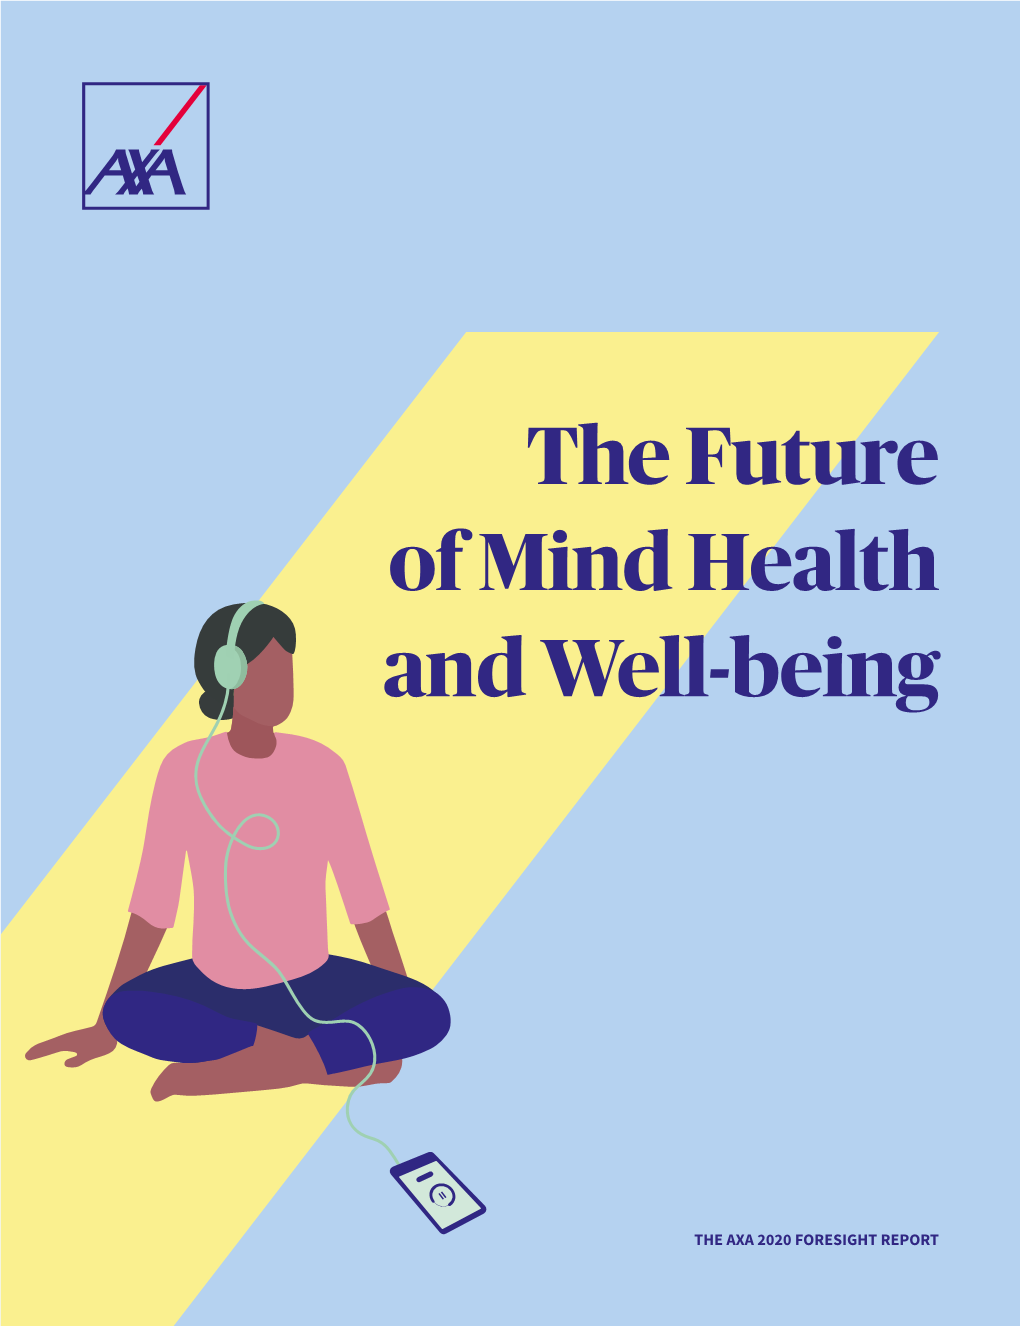 The Future of Mind Health and Well-Being